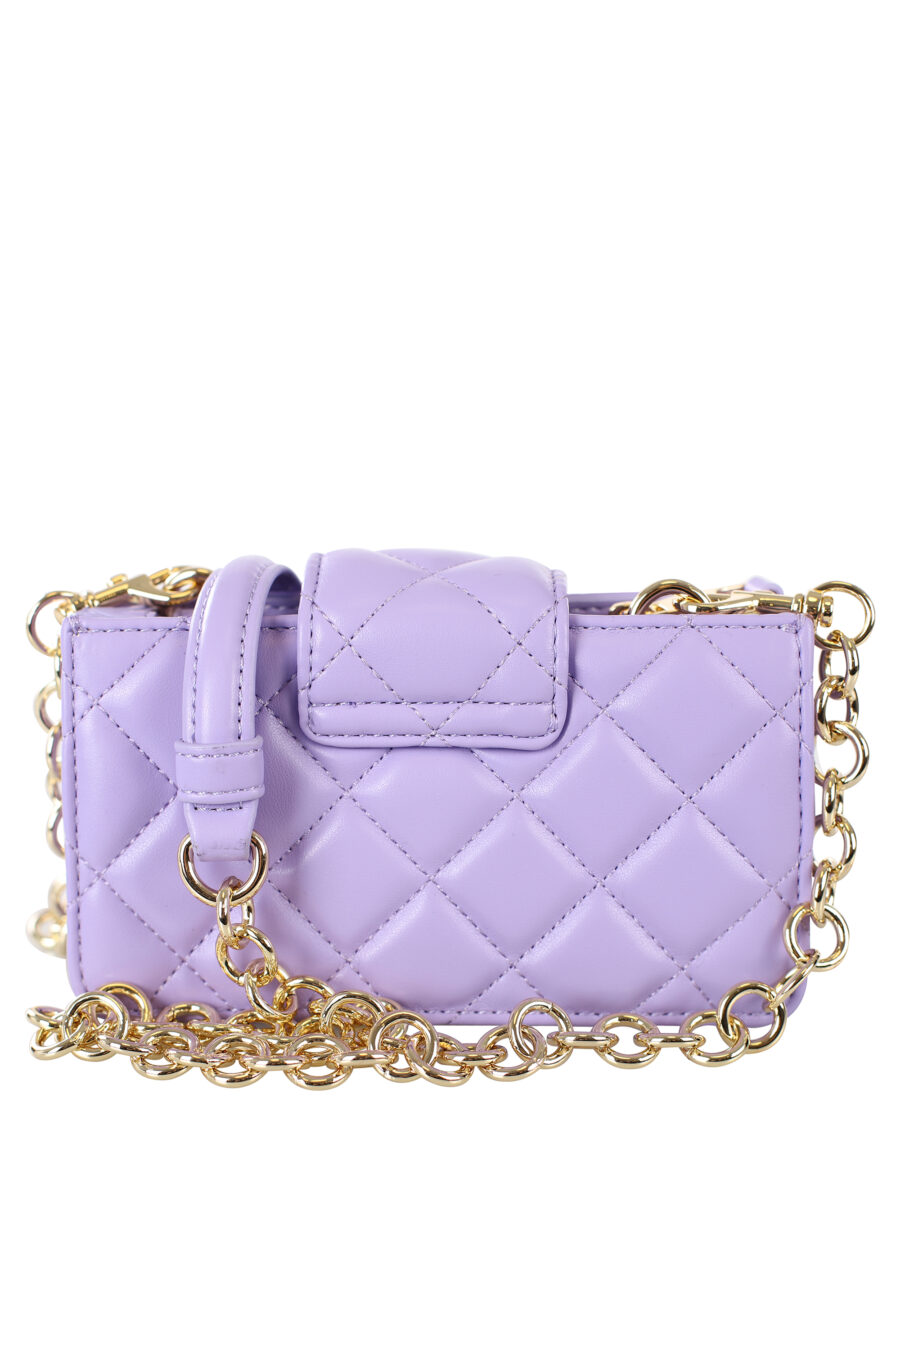 Purple shoulder bag with chain charms - IMG 7254